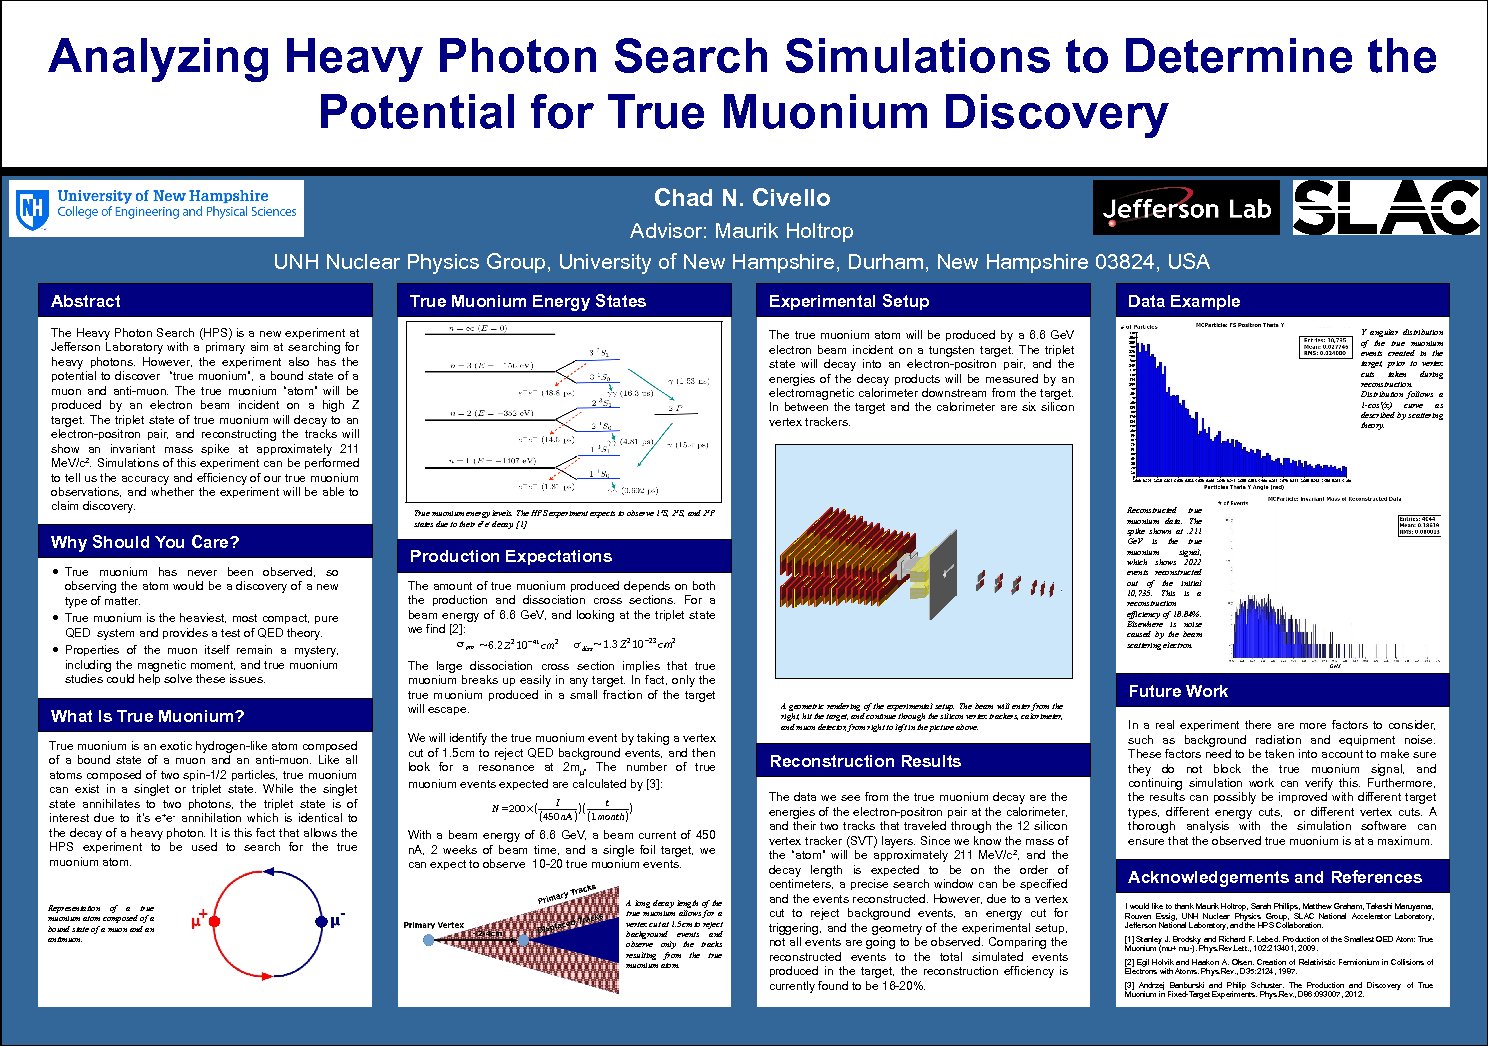 Analyzing Heavy Photon Search Simulations To Determine The Potential For True Muonium Discovery by cng8